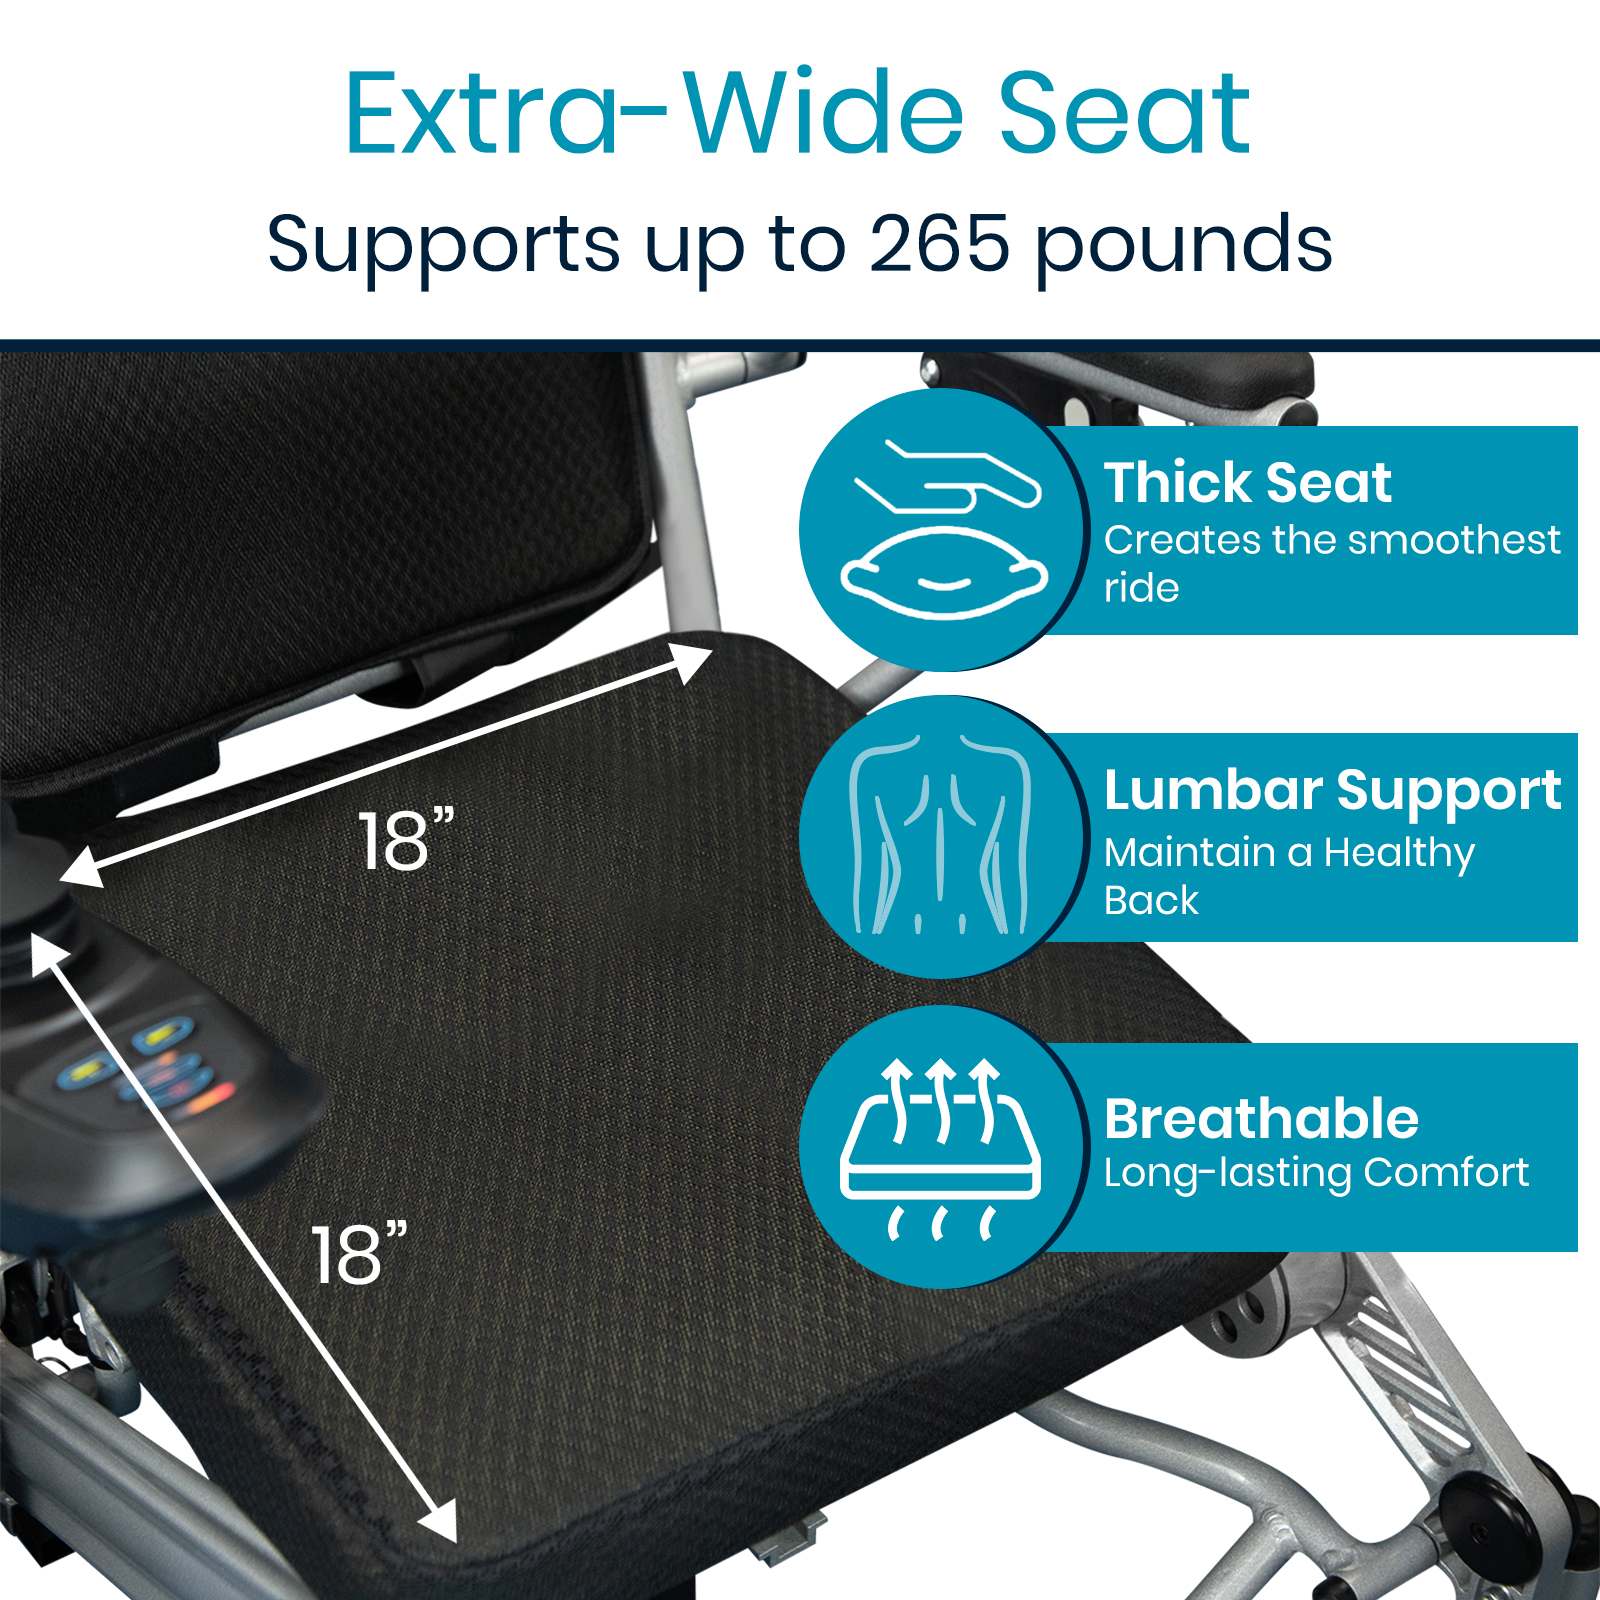 Folding Power Wheelchair seat dimensions by AskSAMIE